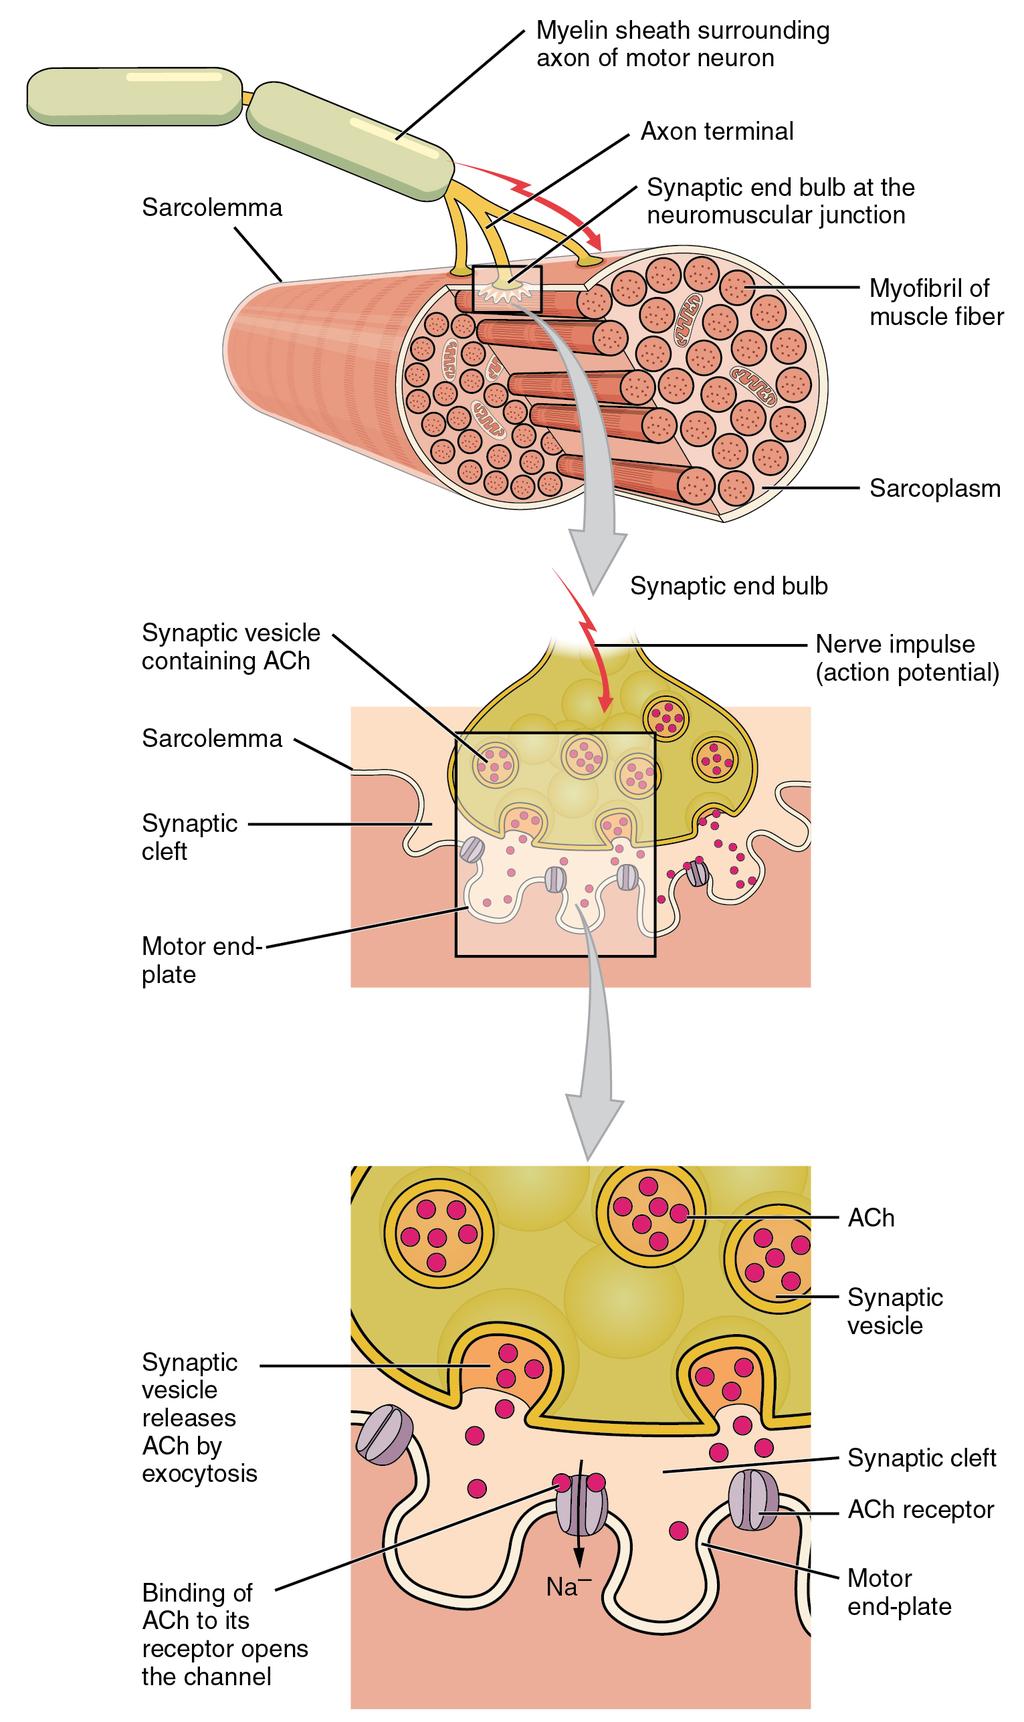 CELL BIOLOGY - CLUTCH 5. The electrical signal is converted into a chemical signal because the synaptic cleft cannot pass electrical signals - Neurotransmitters are the chemical signals a.